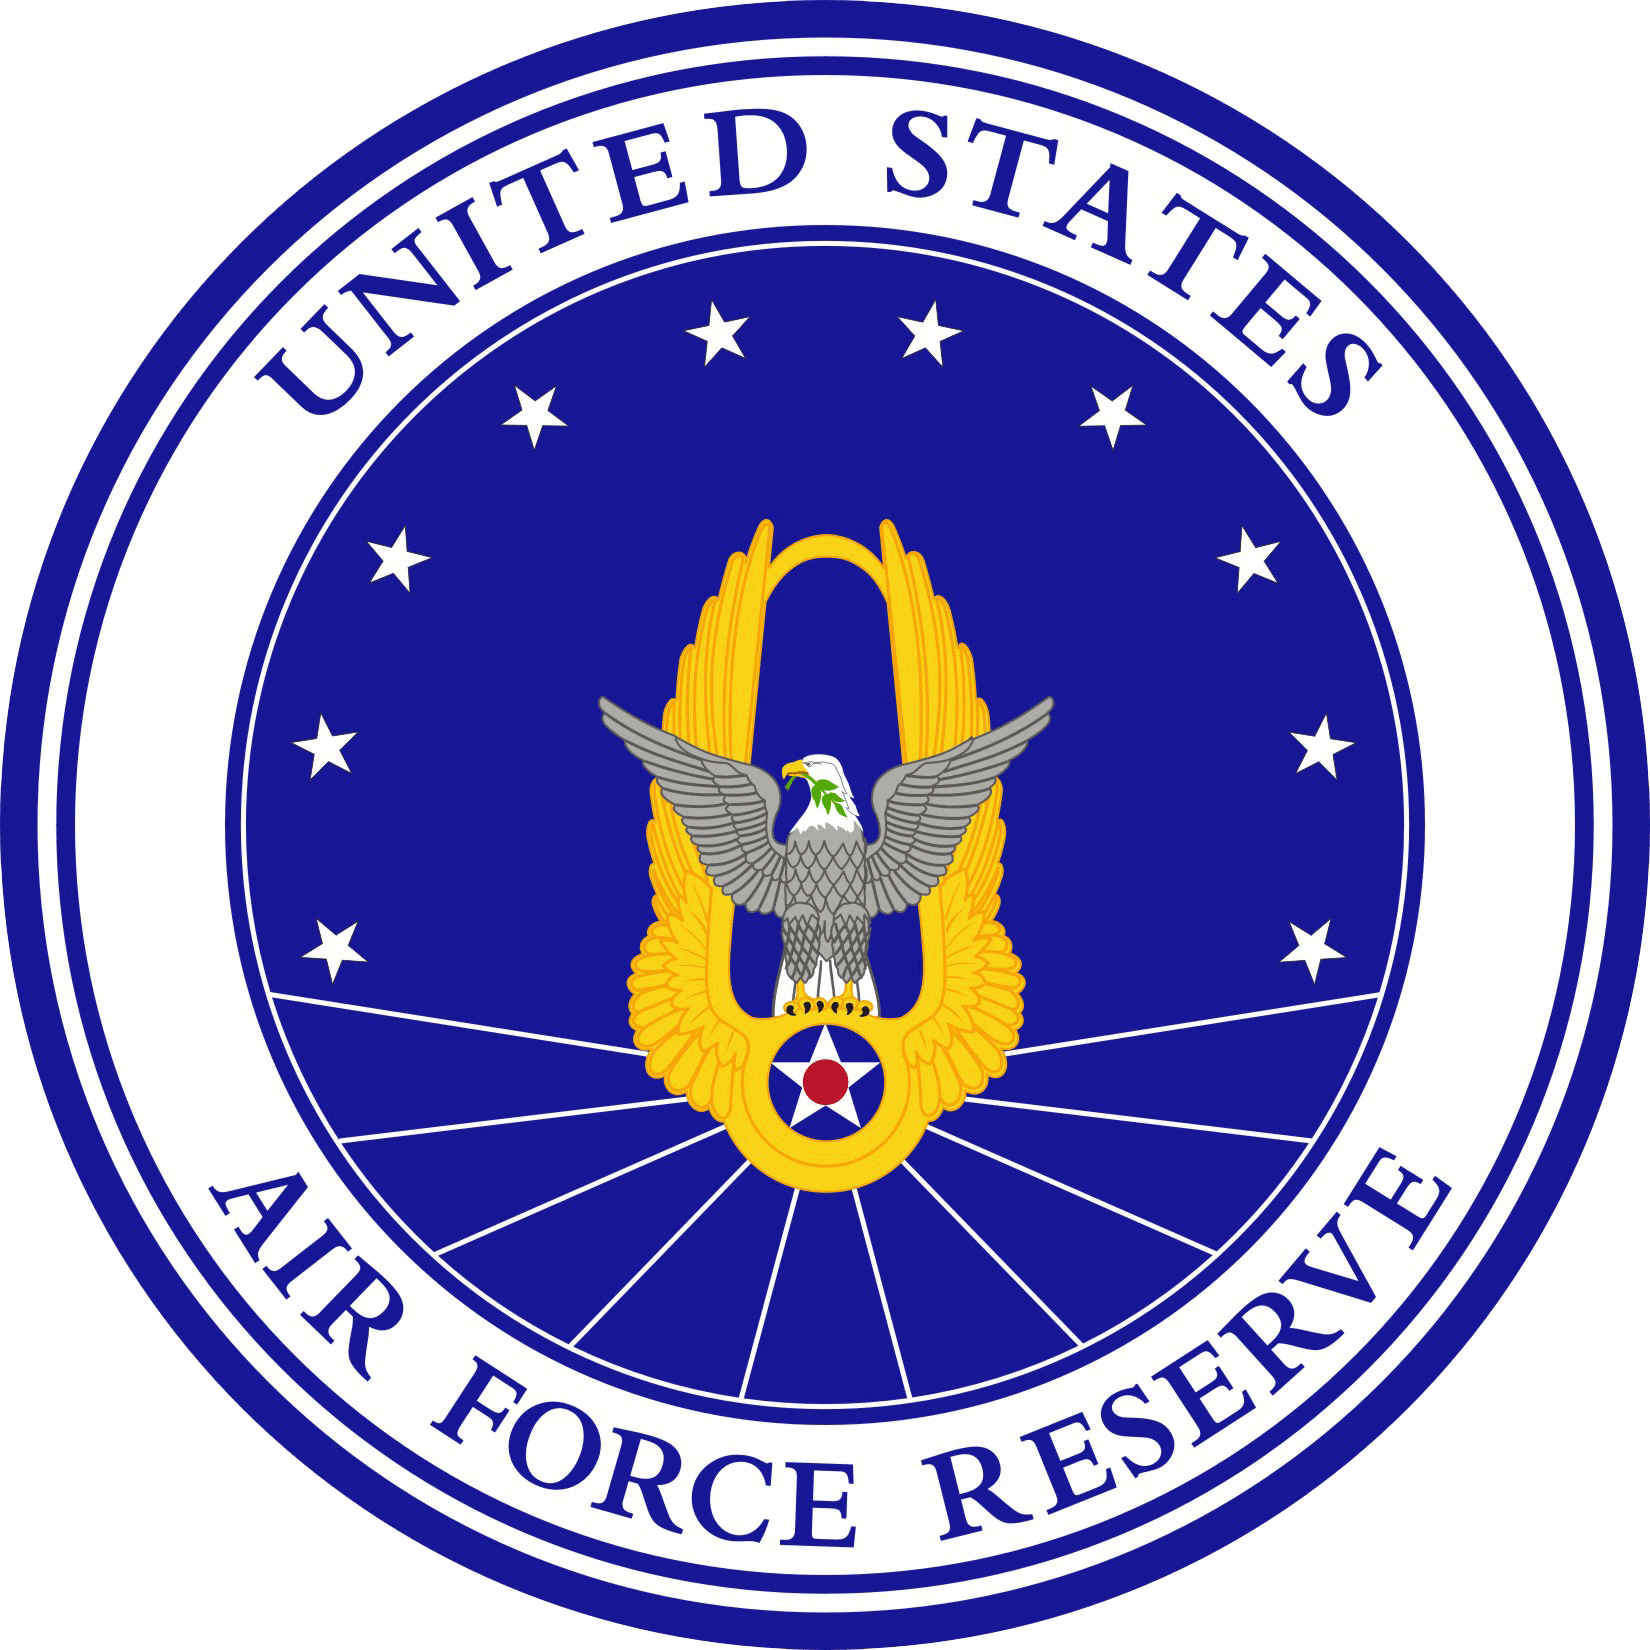 Department Of Homeland Security Seal - United States Air Force Reserve (1650x1650)